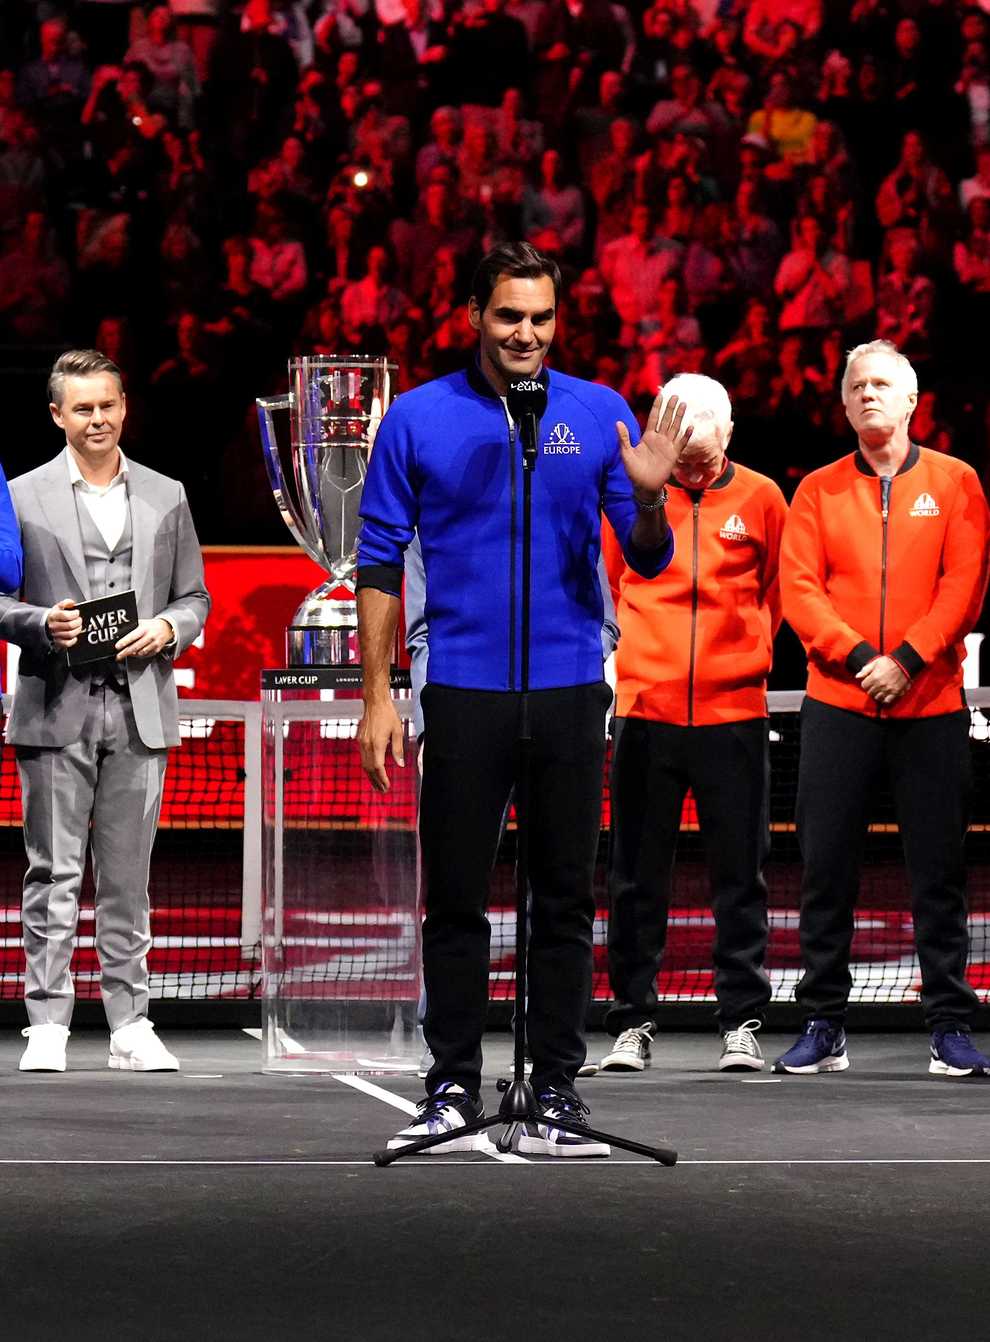 Roger Federer signed off from competitive tennis following defeat with Team Europe in the Laver Cup (John Walton/PA)